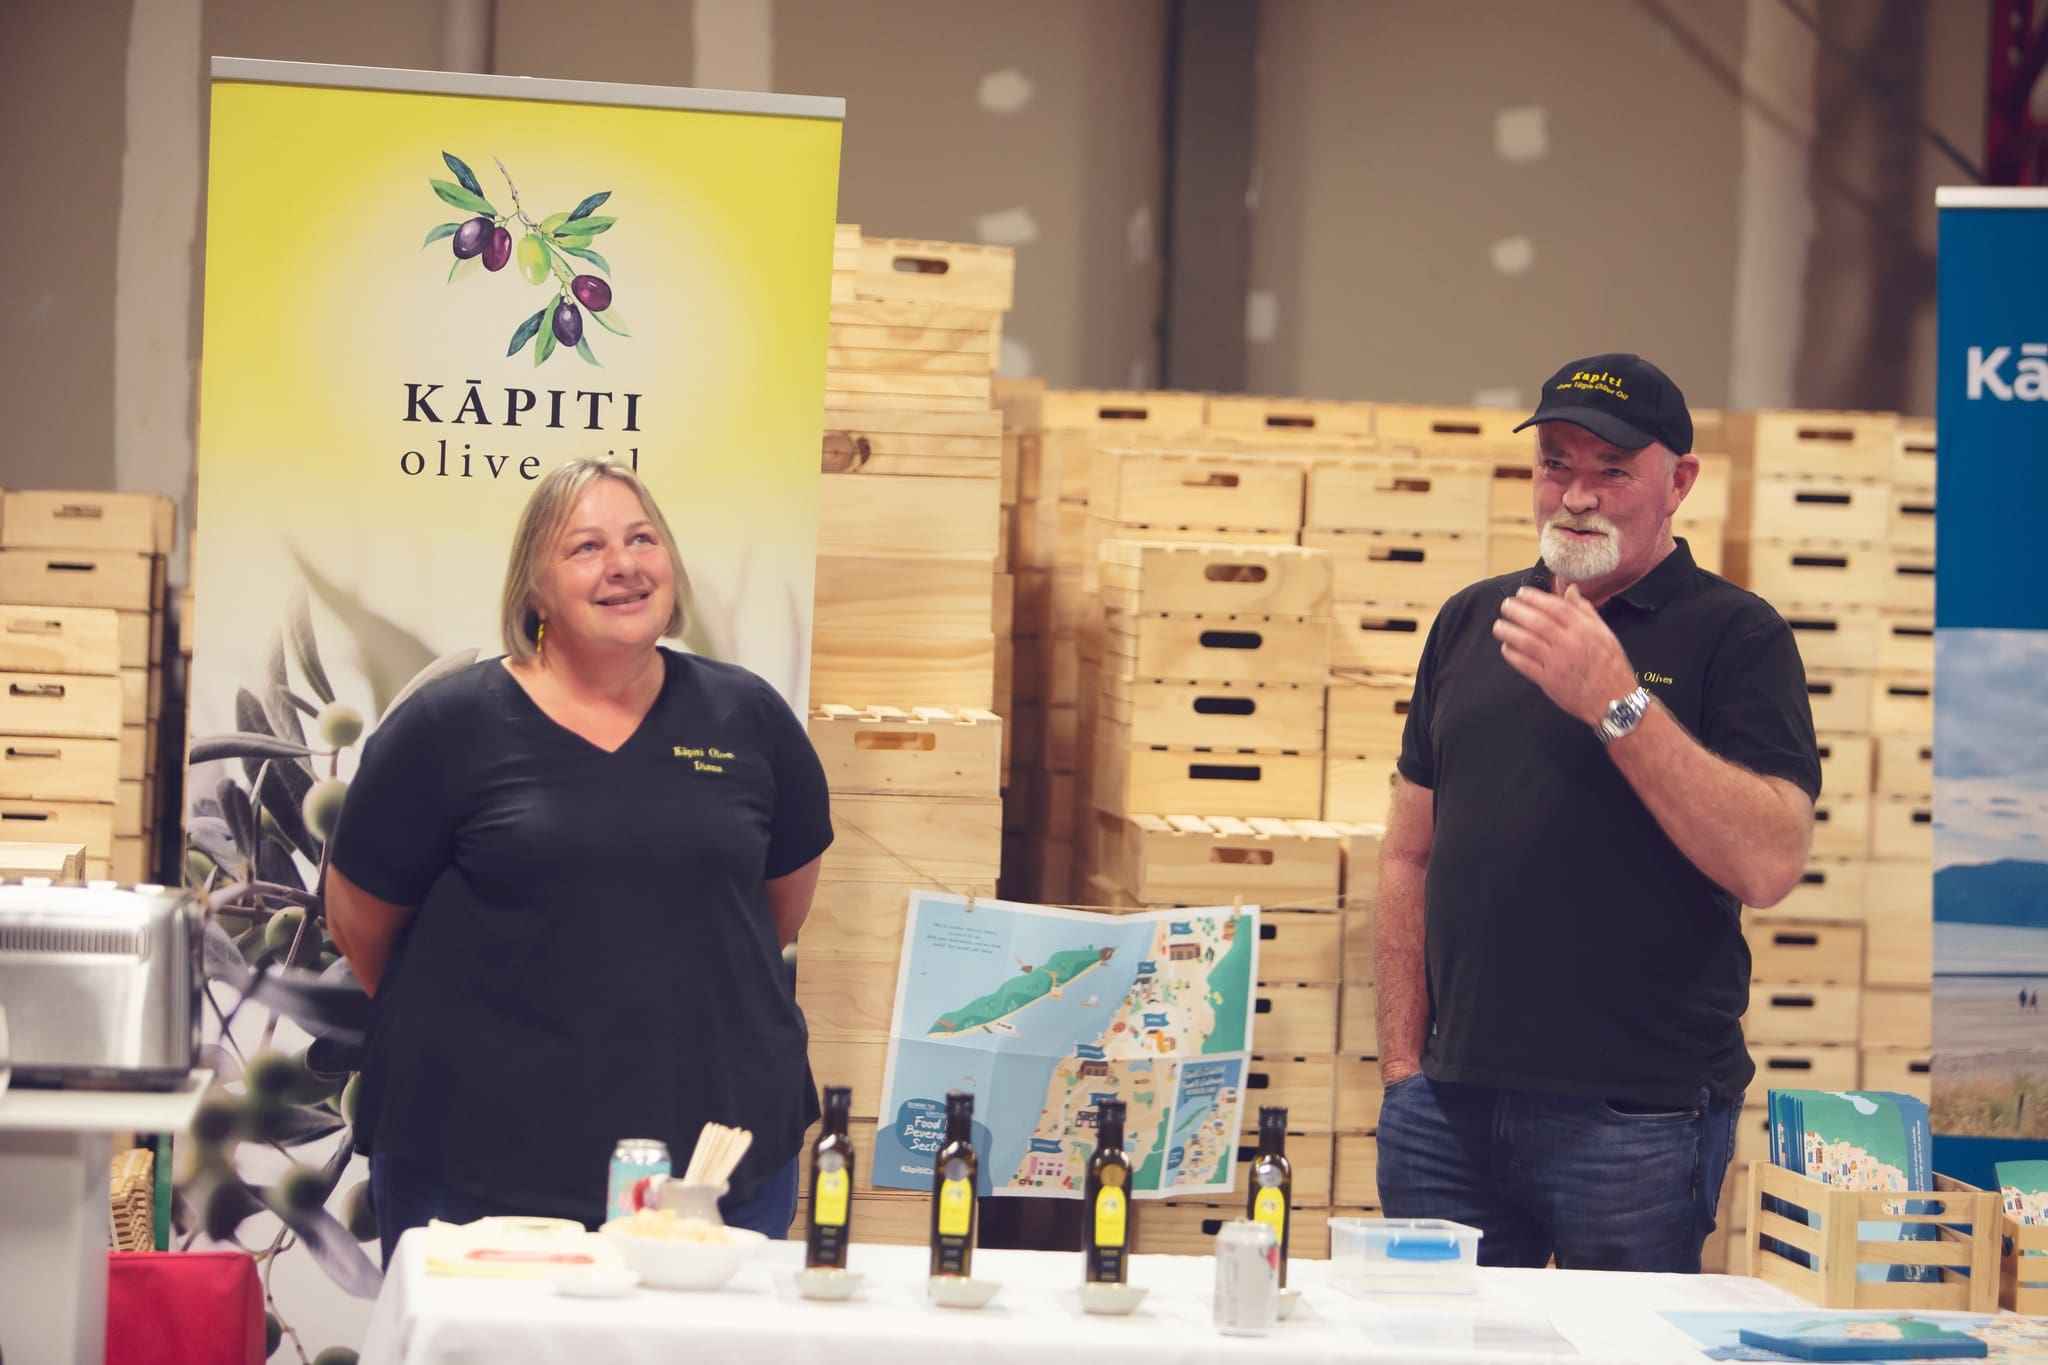 Keeping things really local, we hosted a Food and Beverage Cluster Networking event, celebrating the amazing local industry right here in Kāpiti!  An initiative started by the council to help grow and promote Kāpiti as a food hub! Our journey started with supporting local Kāpiti artisan producers, so this is something we are definitely on board with  It was an awesome evening and a great way to celebrate like minded people with a love for all things local!